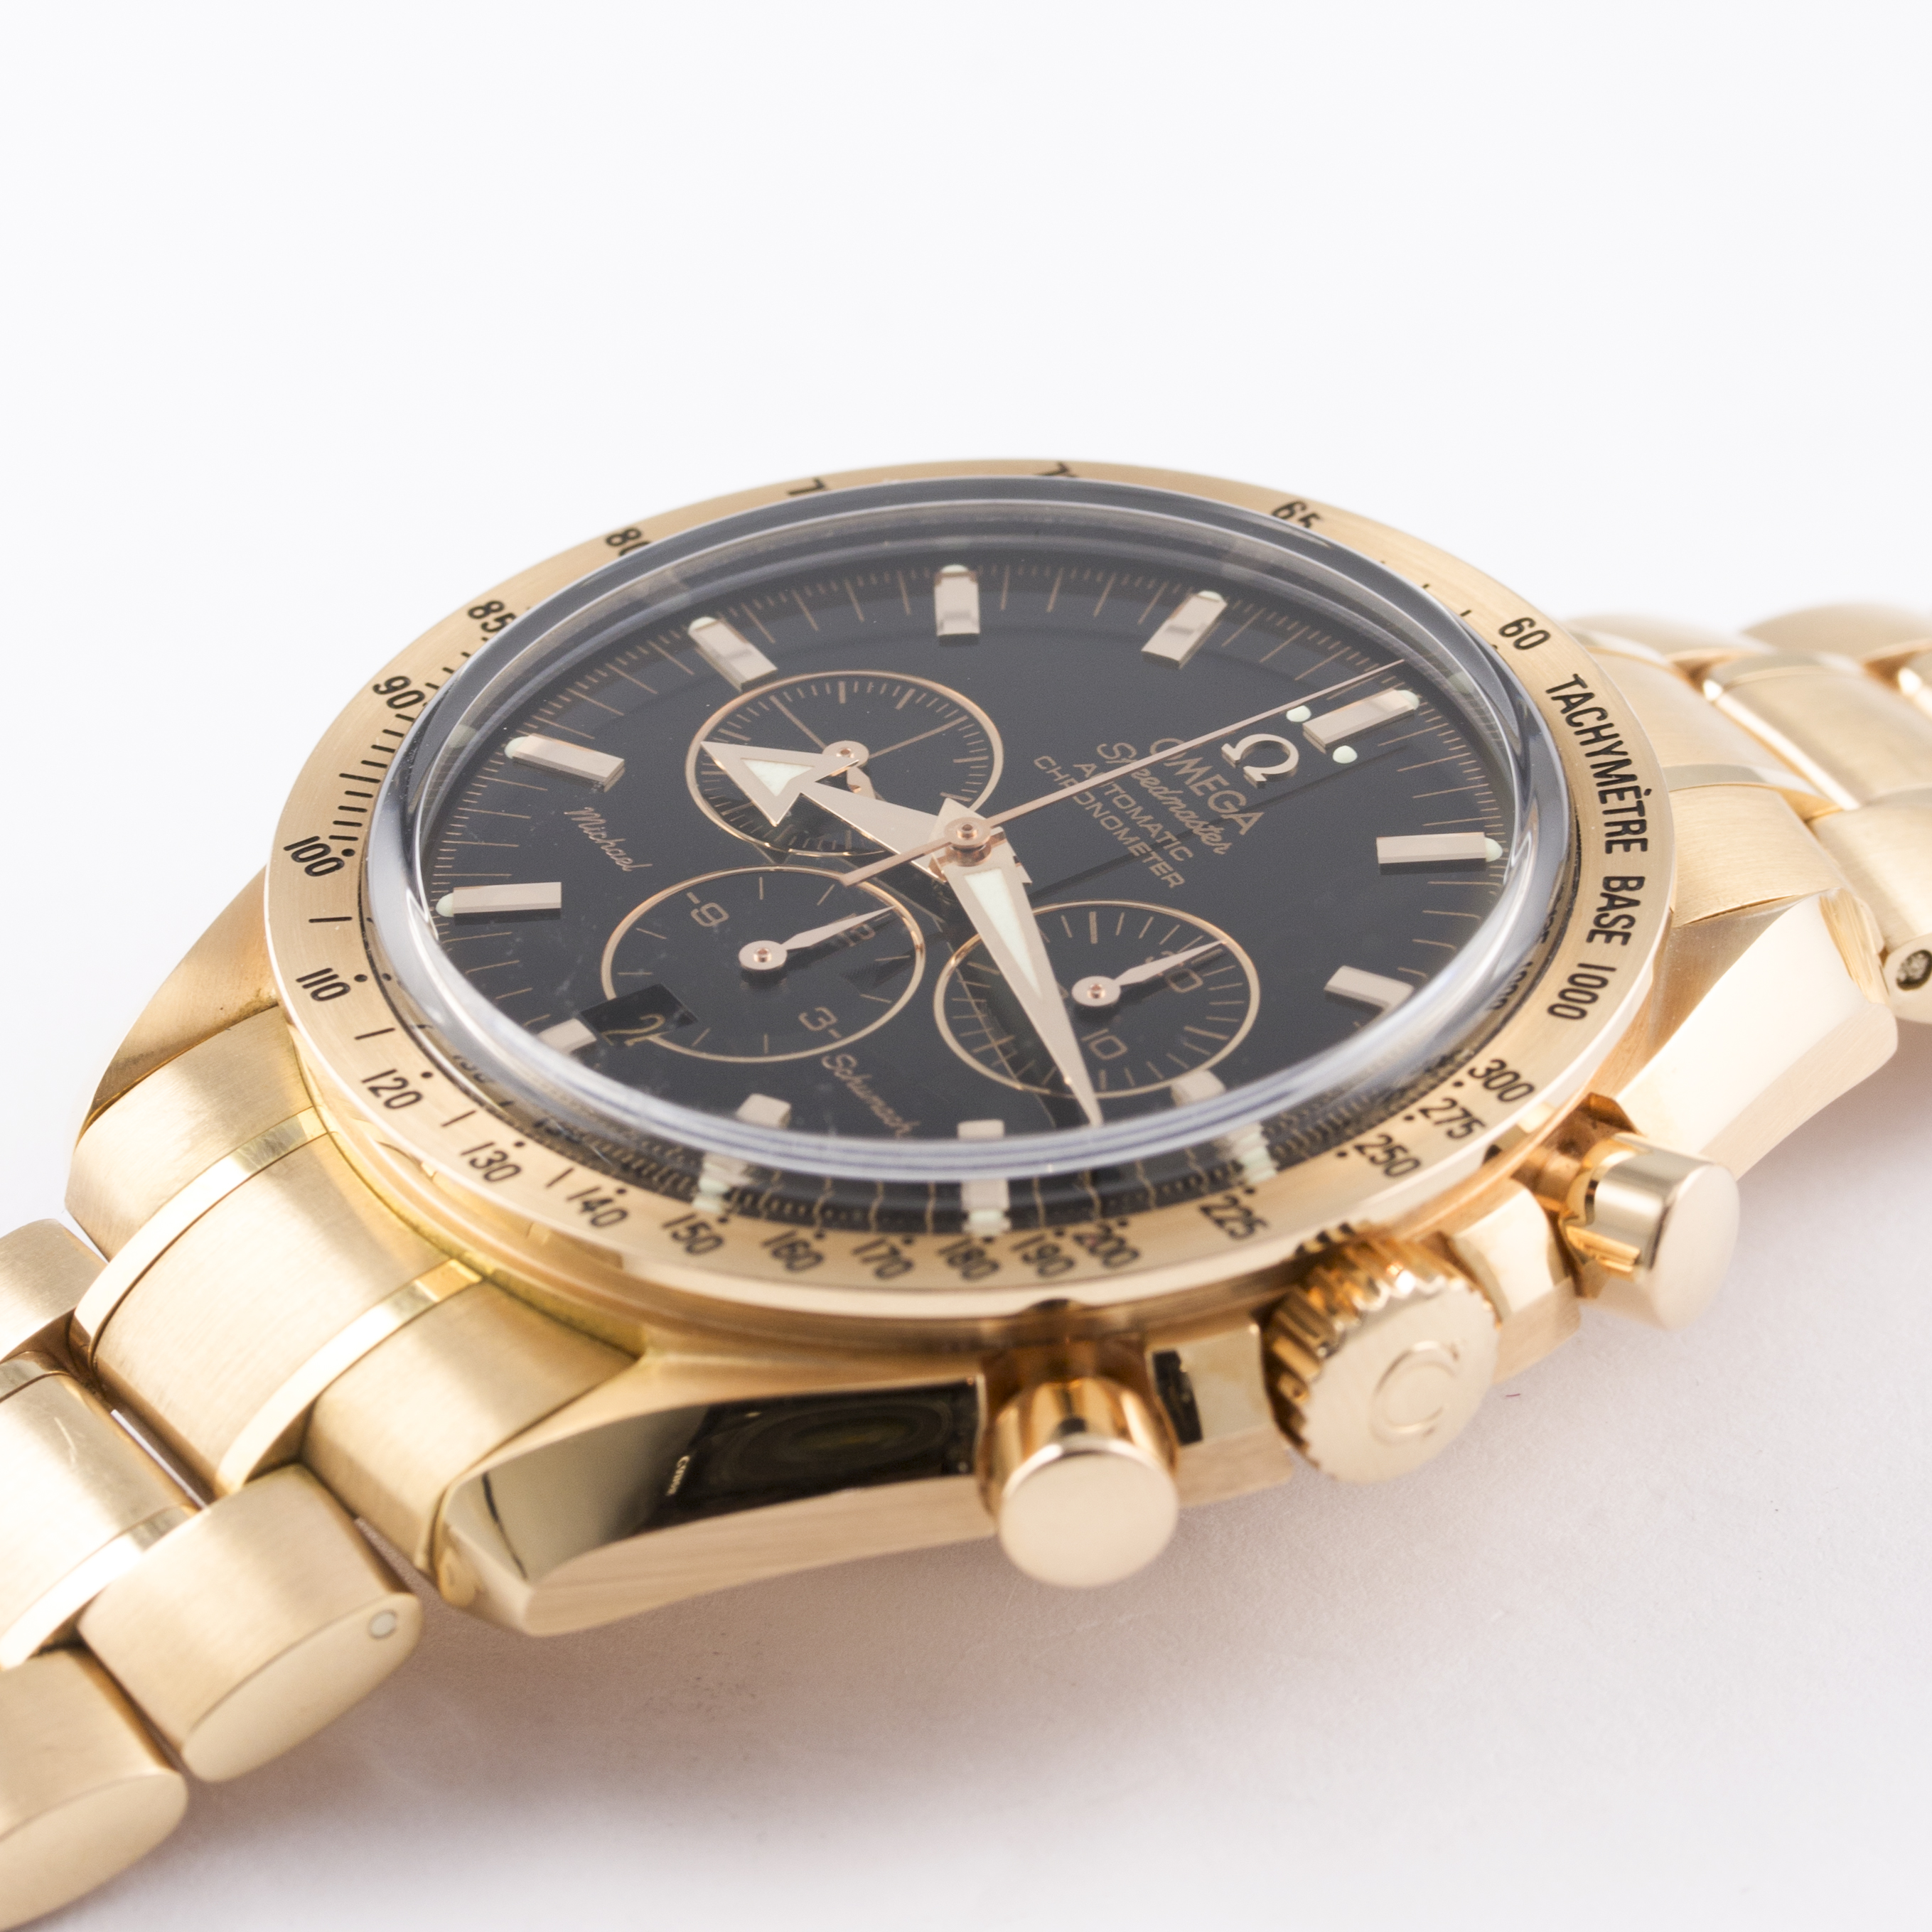 A FINE & RARE GENTLEMAN'S 18K ROSE GOLD OMEGA SPEEDMASTER AUTOMATIC CHRONOGRAPH BRACELET WATCH DATED - Image 4 of 8